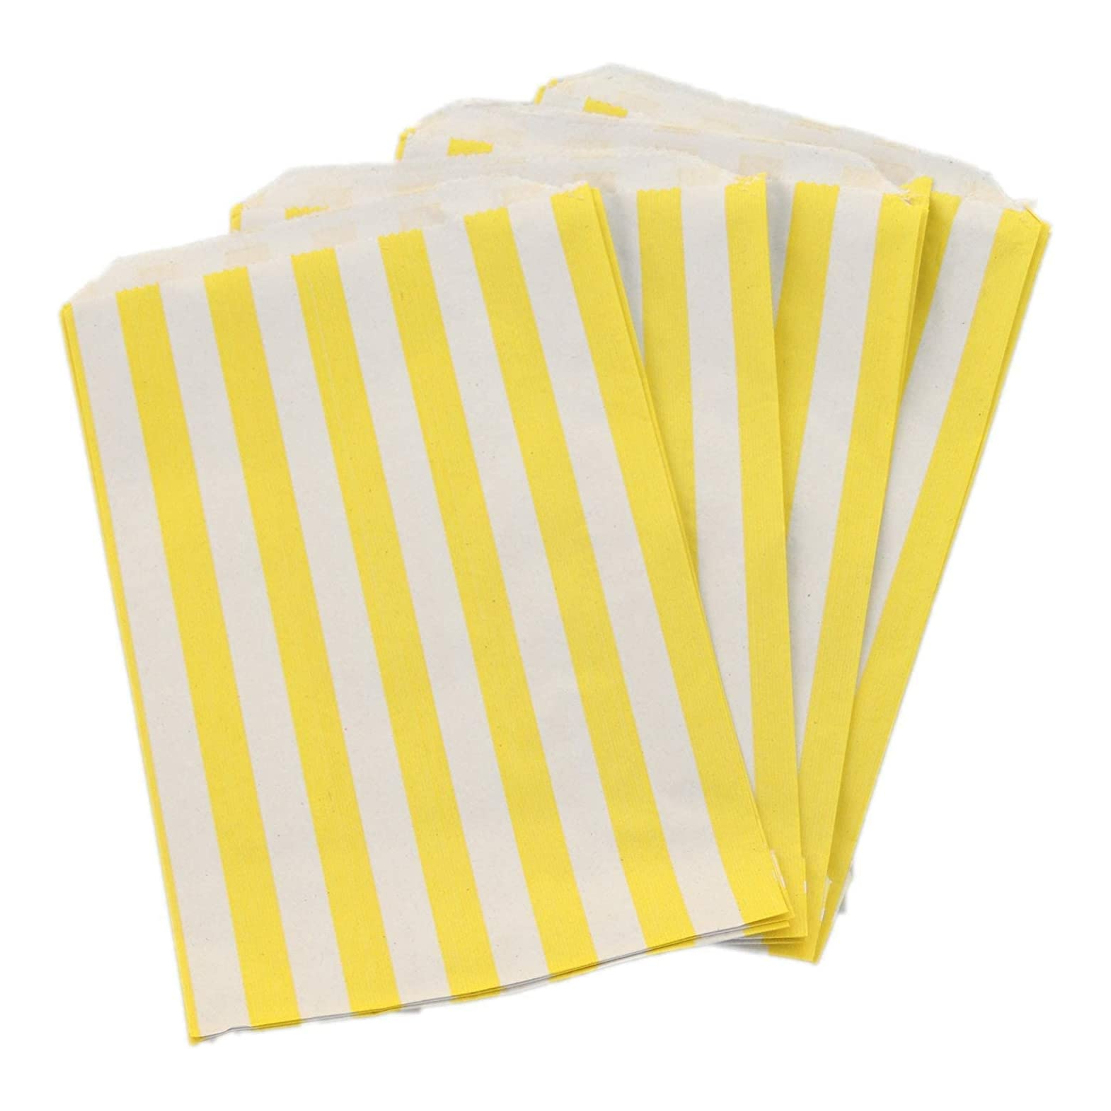 Candy Stripe Yellow & White Paper Bags 7x9 Inch (Pack of 50)